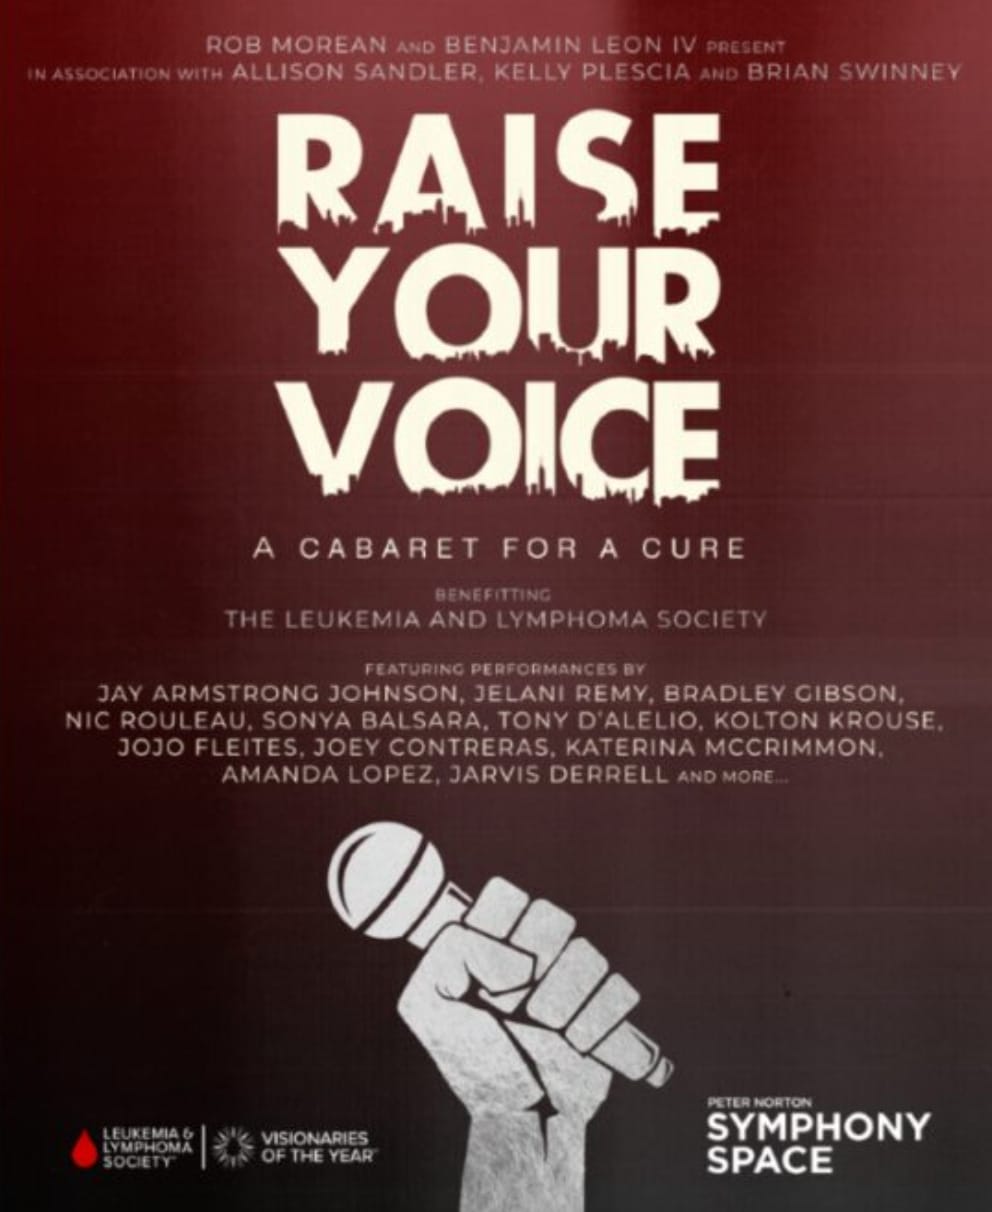 Raise Your Voice: Cabaret for a Cure event poster.